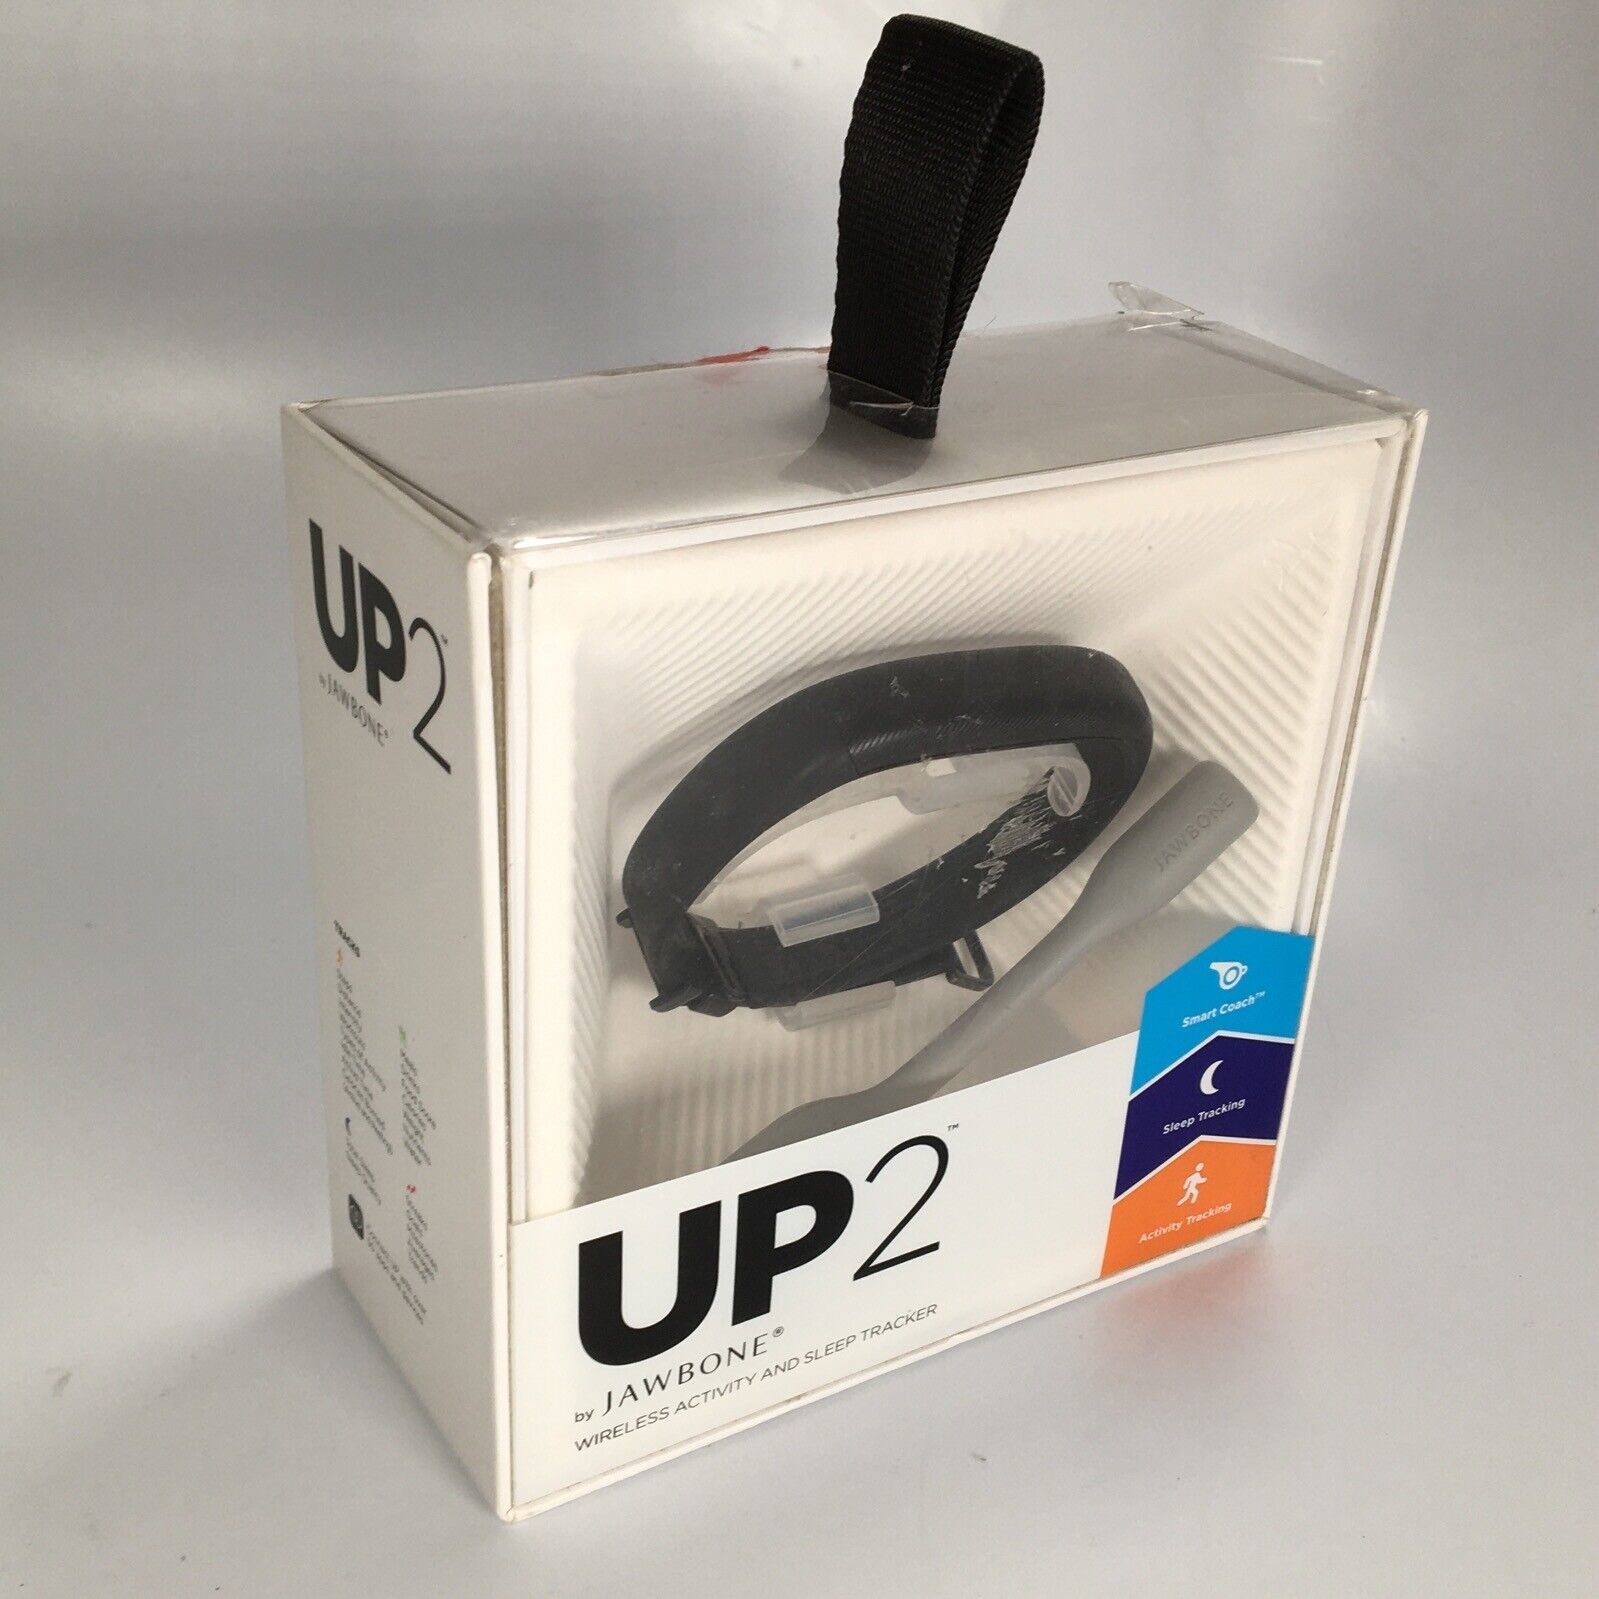 UP2 By Jawbone Wireless Activity and Sleep Tracker Used - $11.08